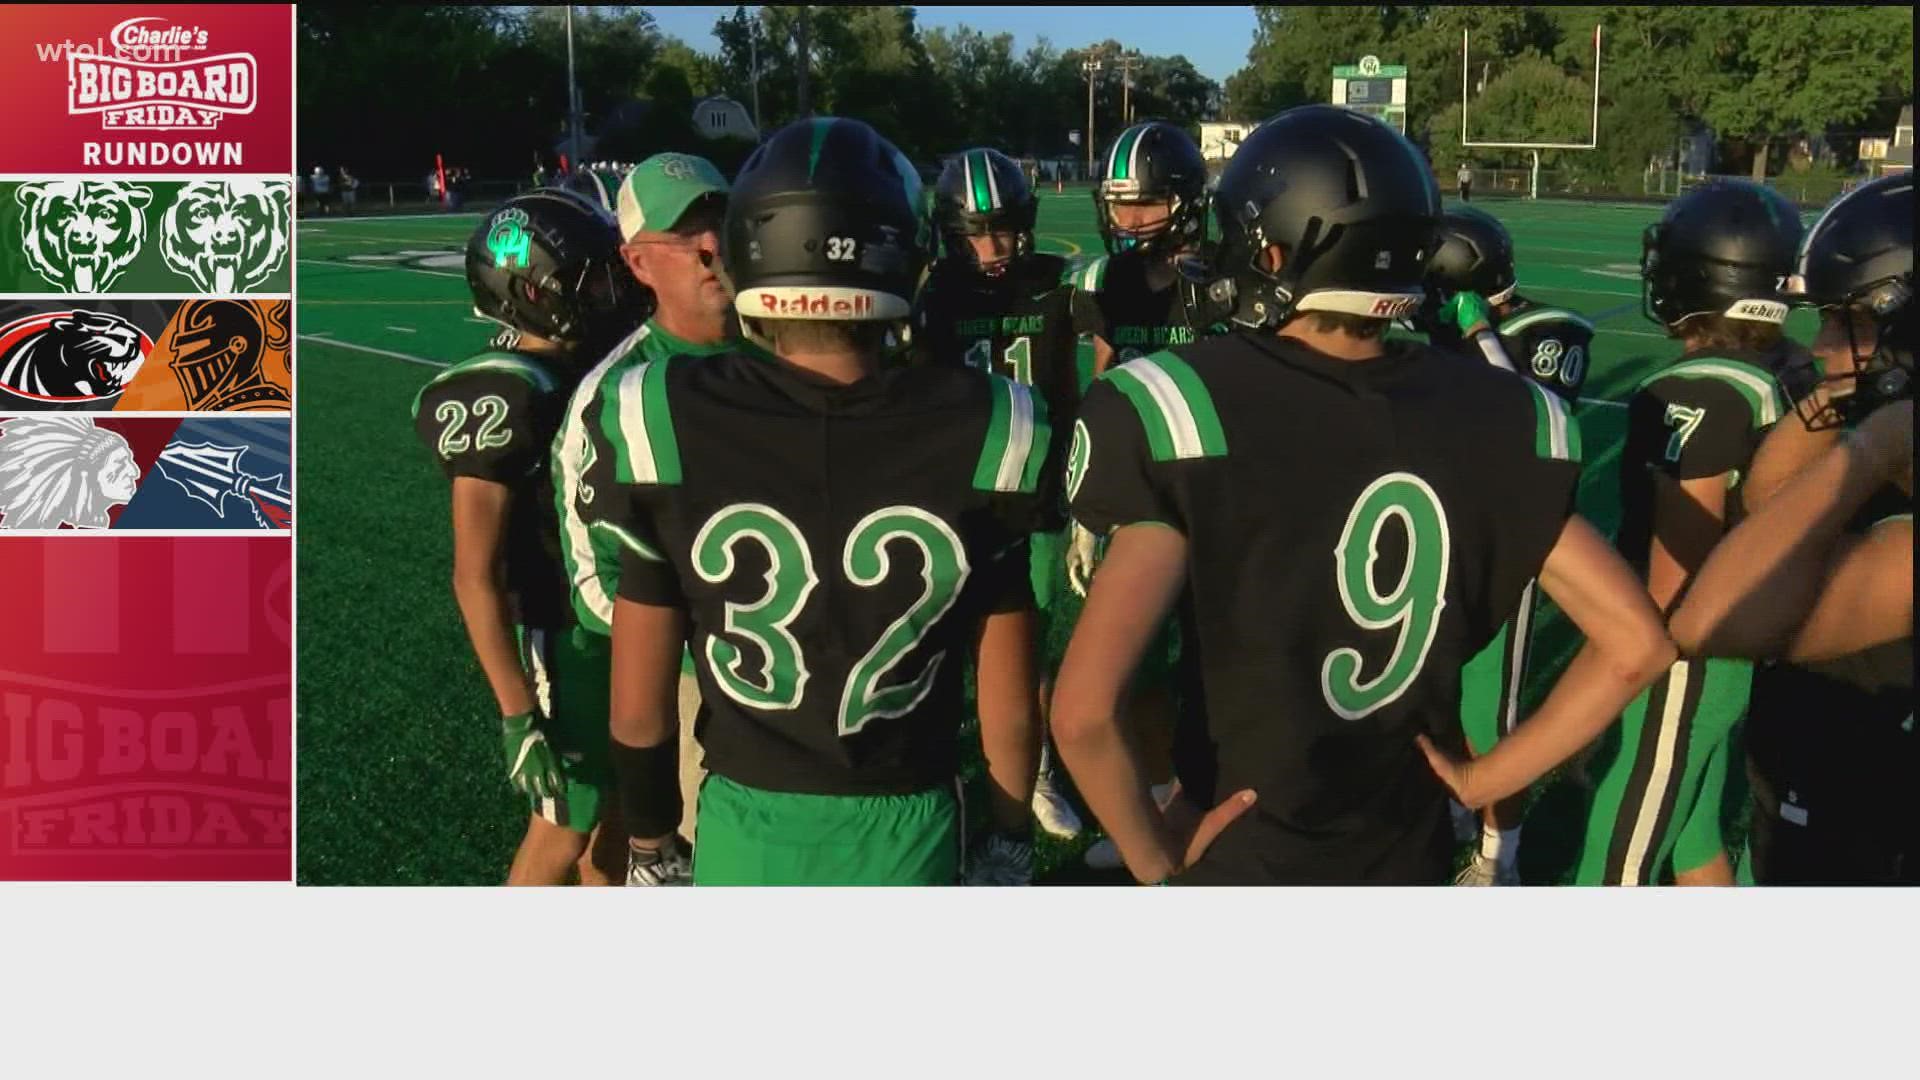 Ottawa Hills comes in trying to win a third straight game.